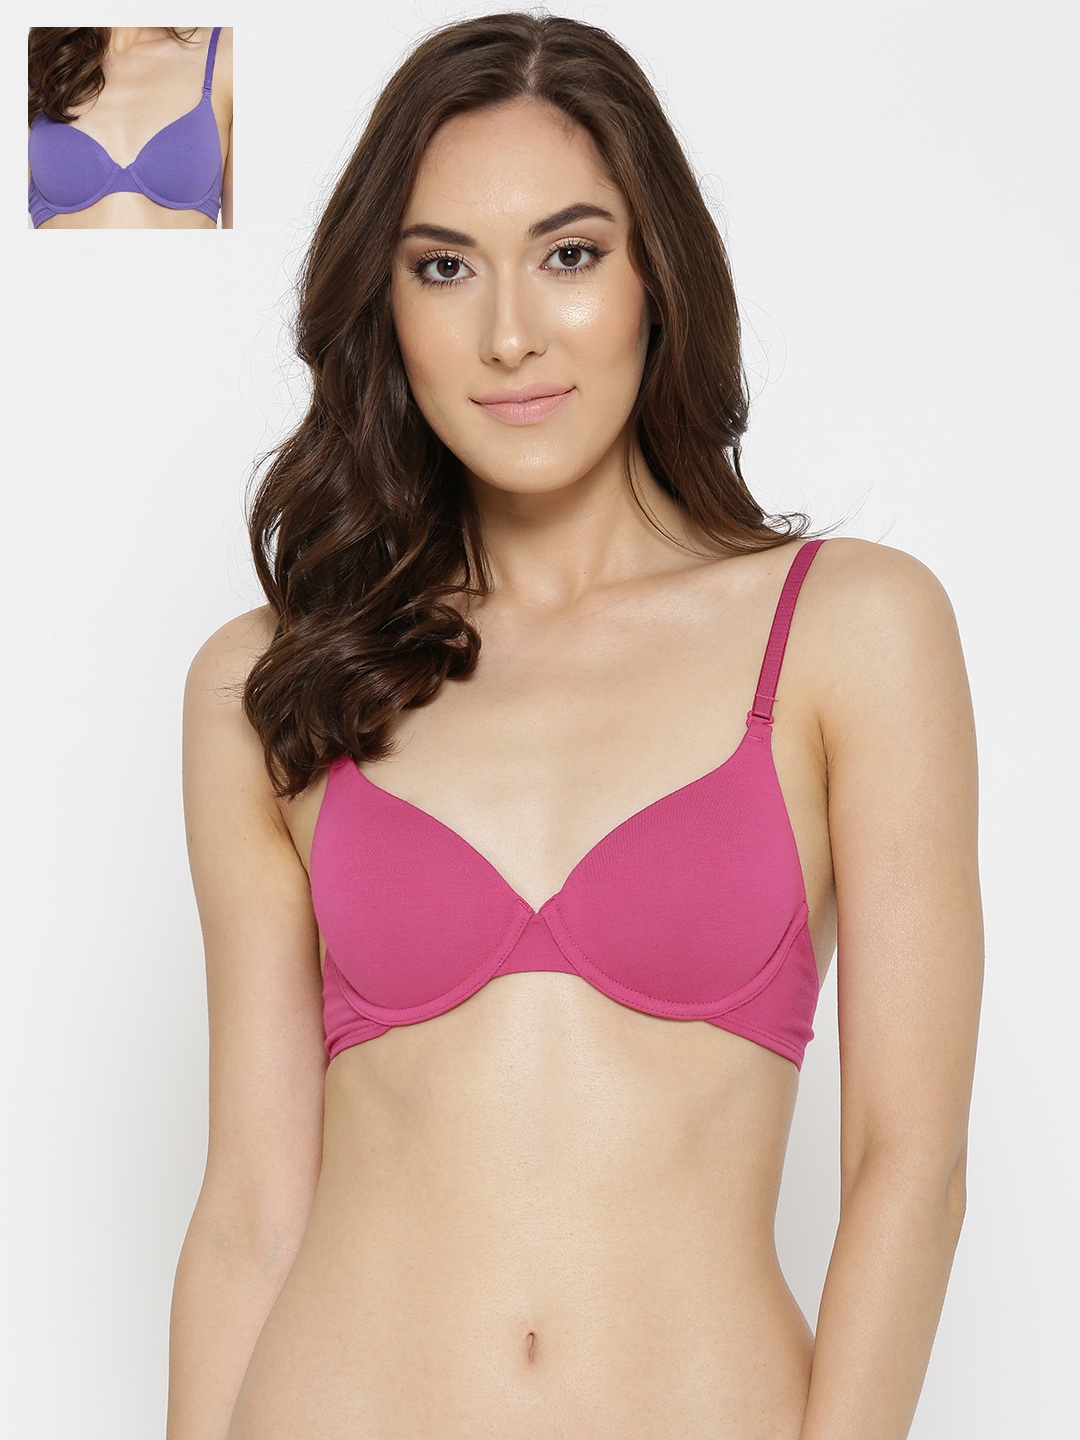 AMANTE-BRA75701 Smooth Definition Padded Wired T-shirt Bra